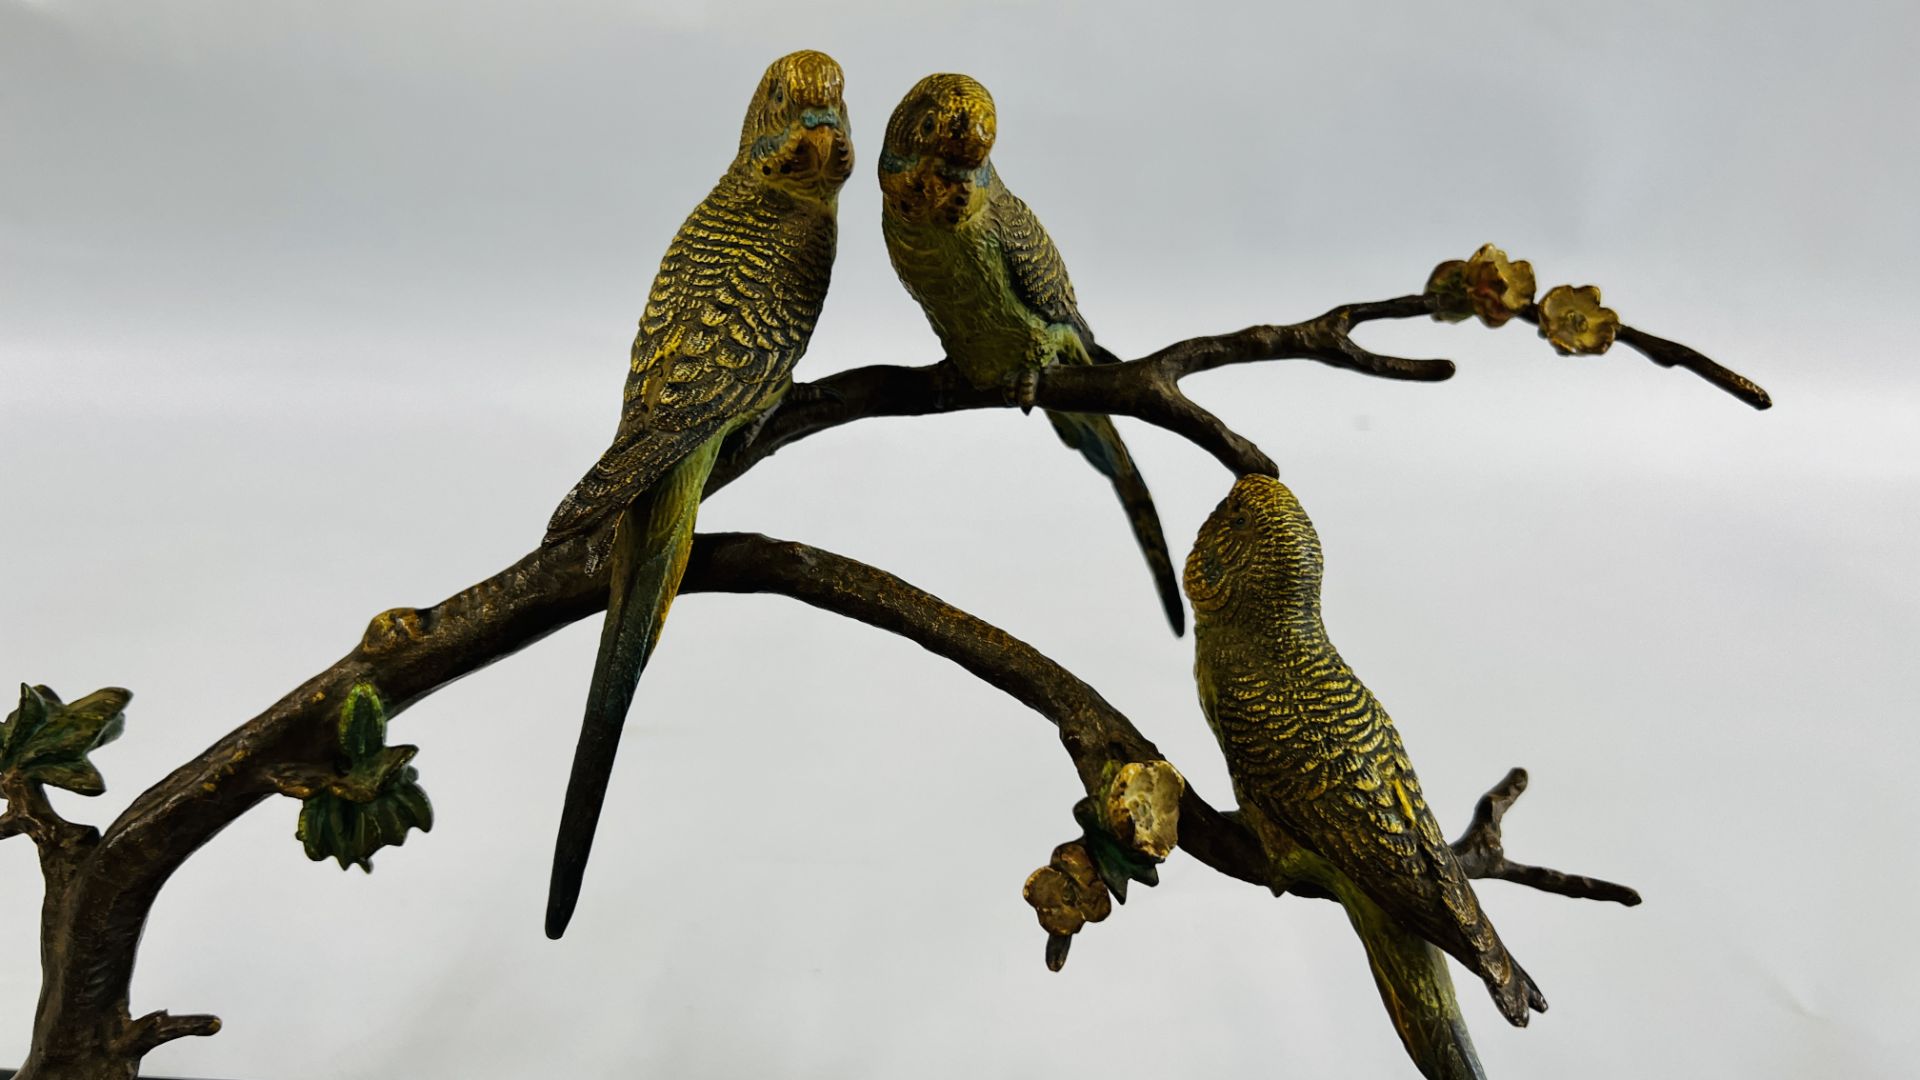 COLD PAINTED BRONZE STUDY OF THREE BUDGERIGARS ON A BLOSSOM BRANCH ON A HARD STONE BASE - L 33CM X - Image 3 of 8